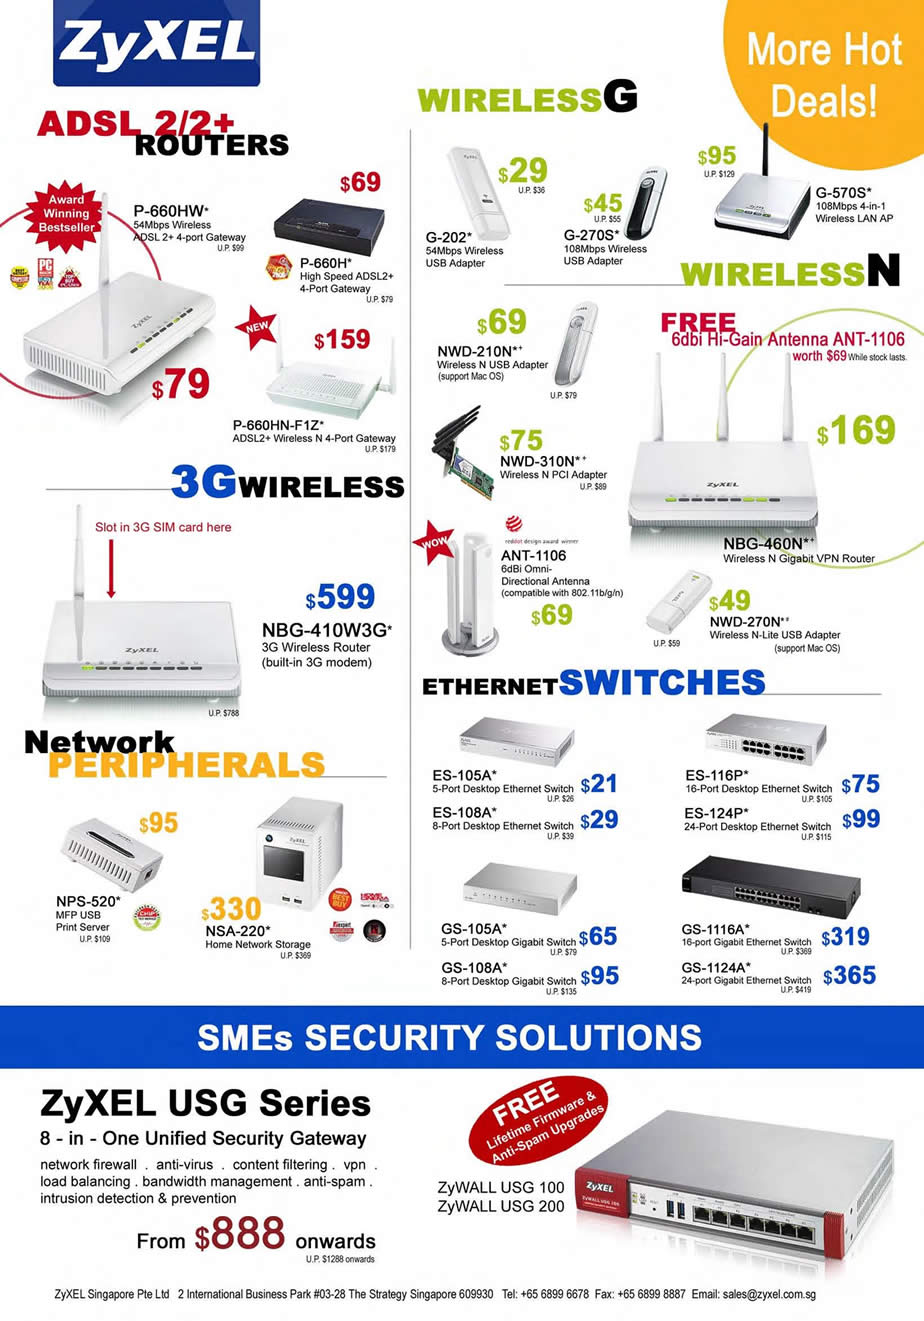 PC Show 2009 price list image brochure of Zyxel ADSL 2 Router 3G Wireless G Network Ethernet Switches